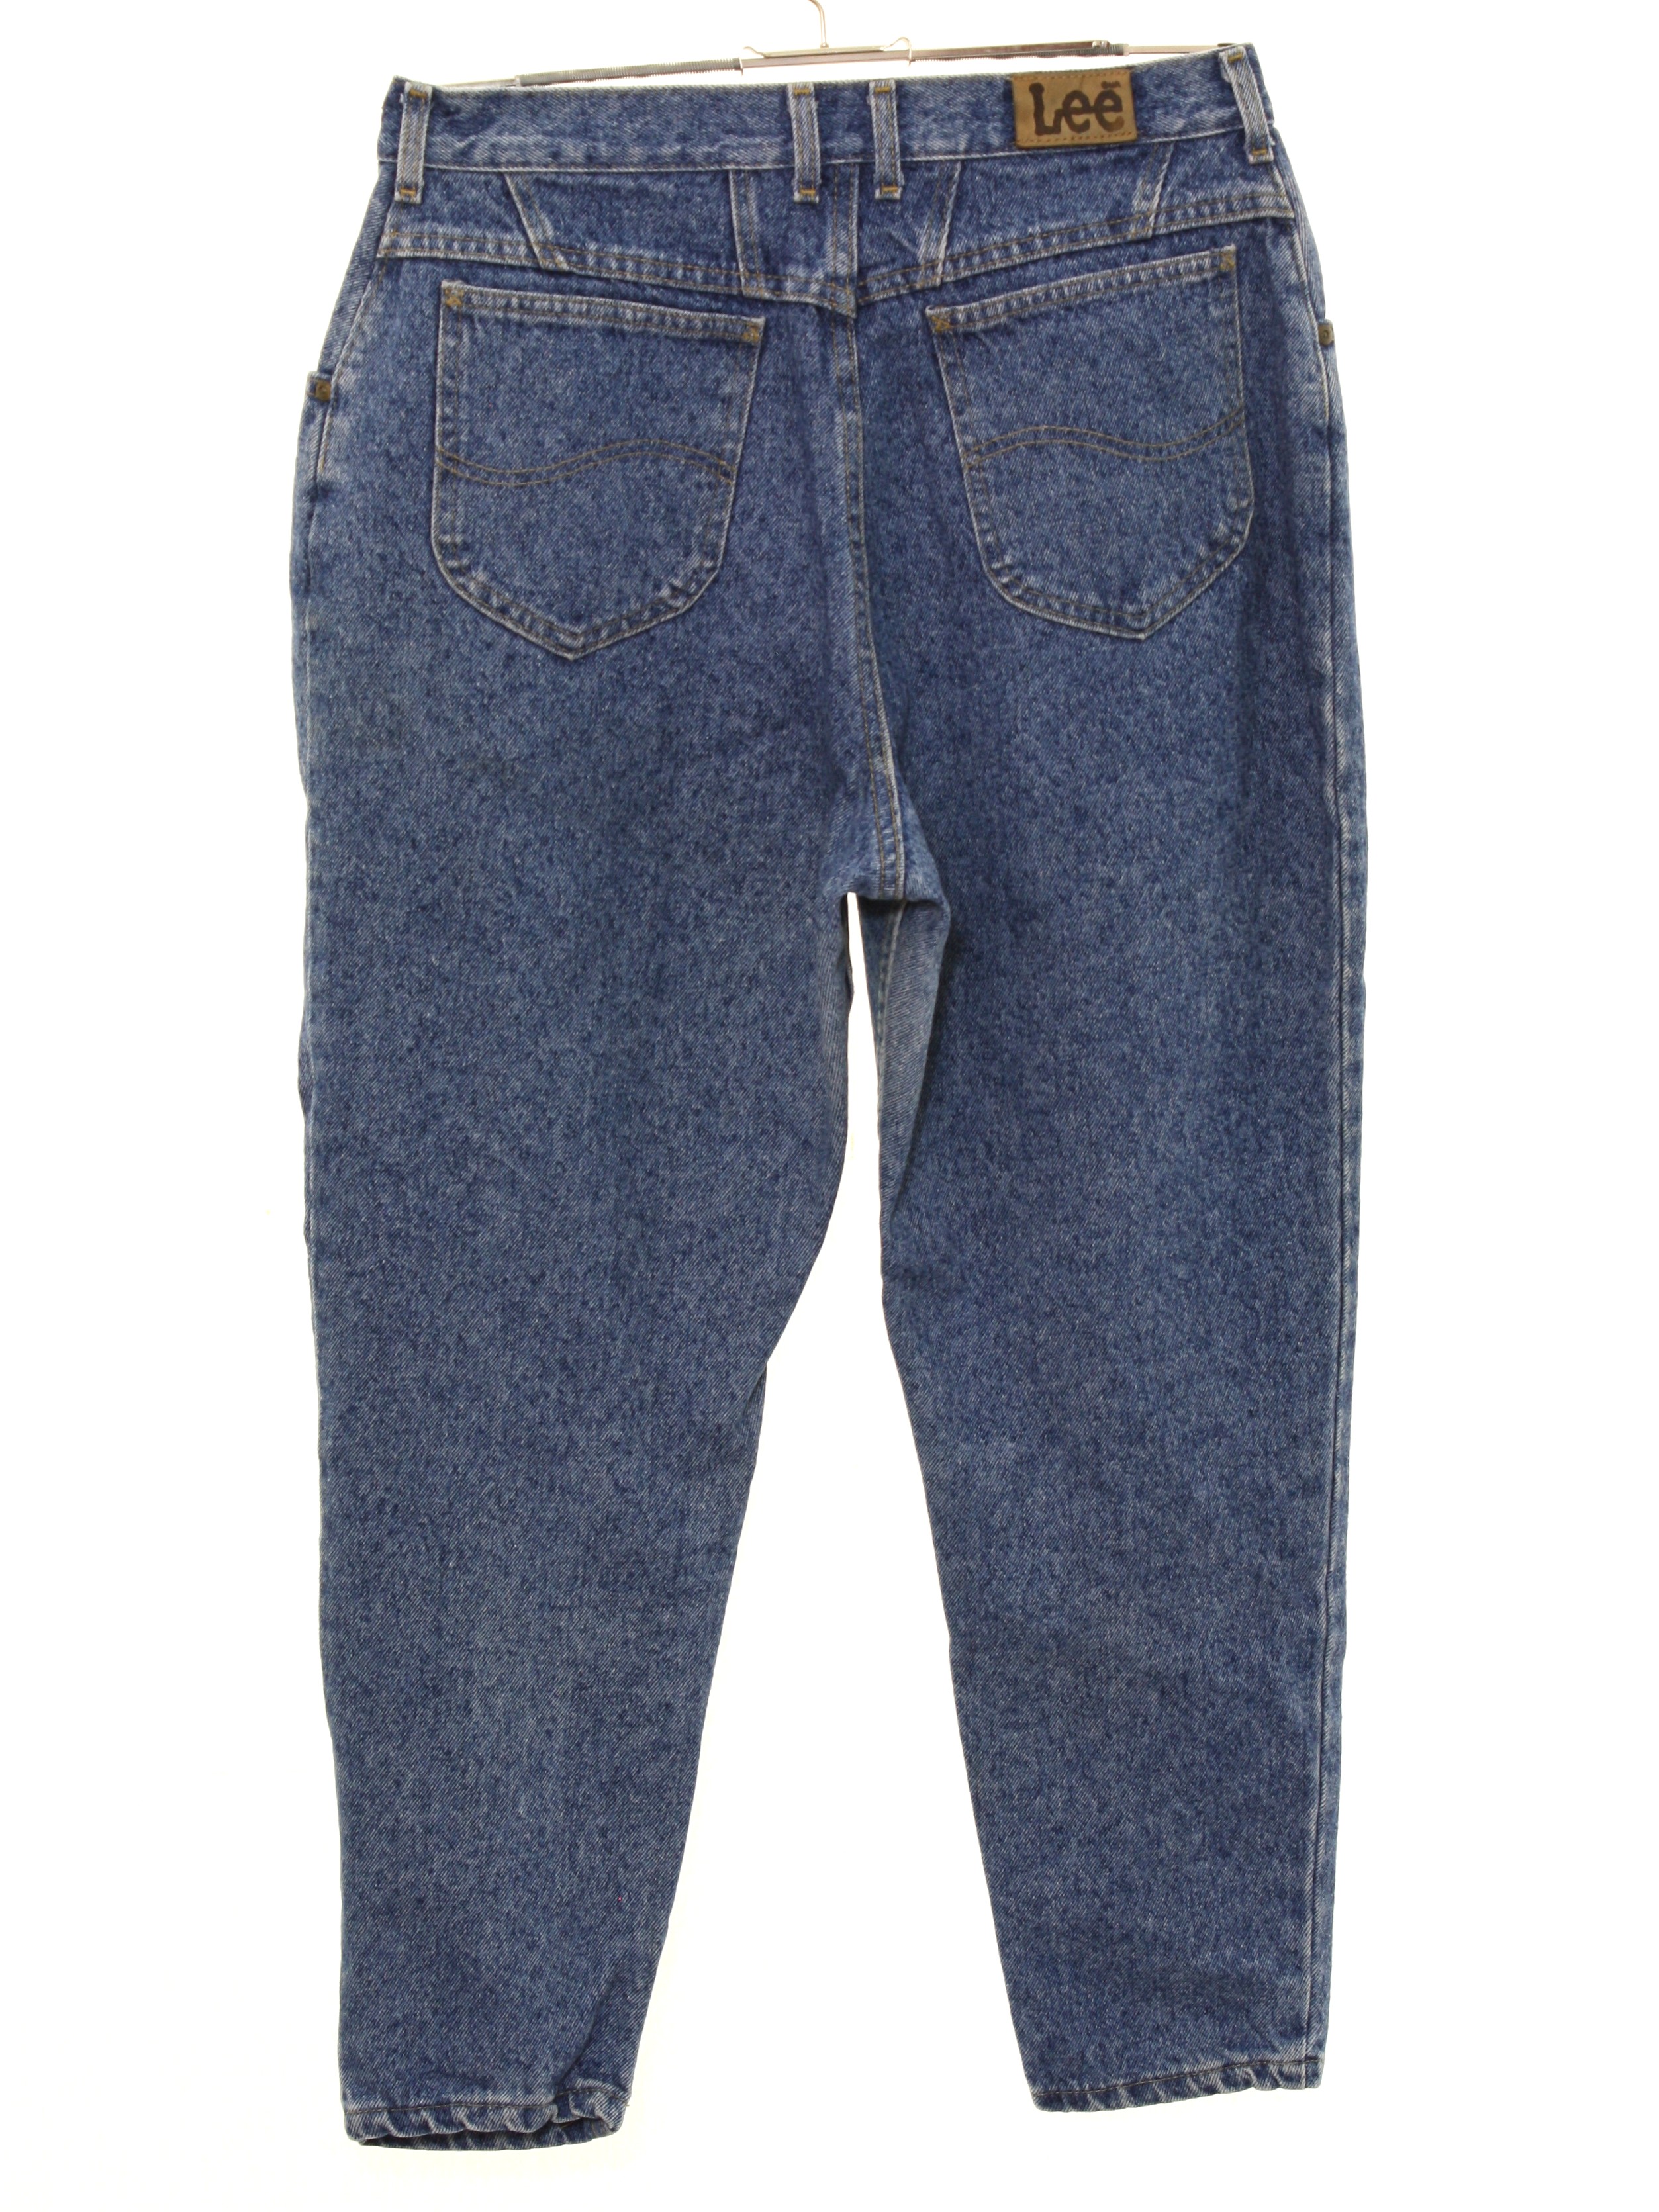 Retro 1990's Pants (Lee) : 90s -Lee- Womens stone washed faded and worn ...